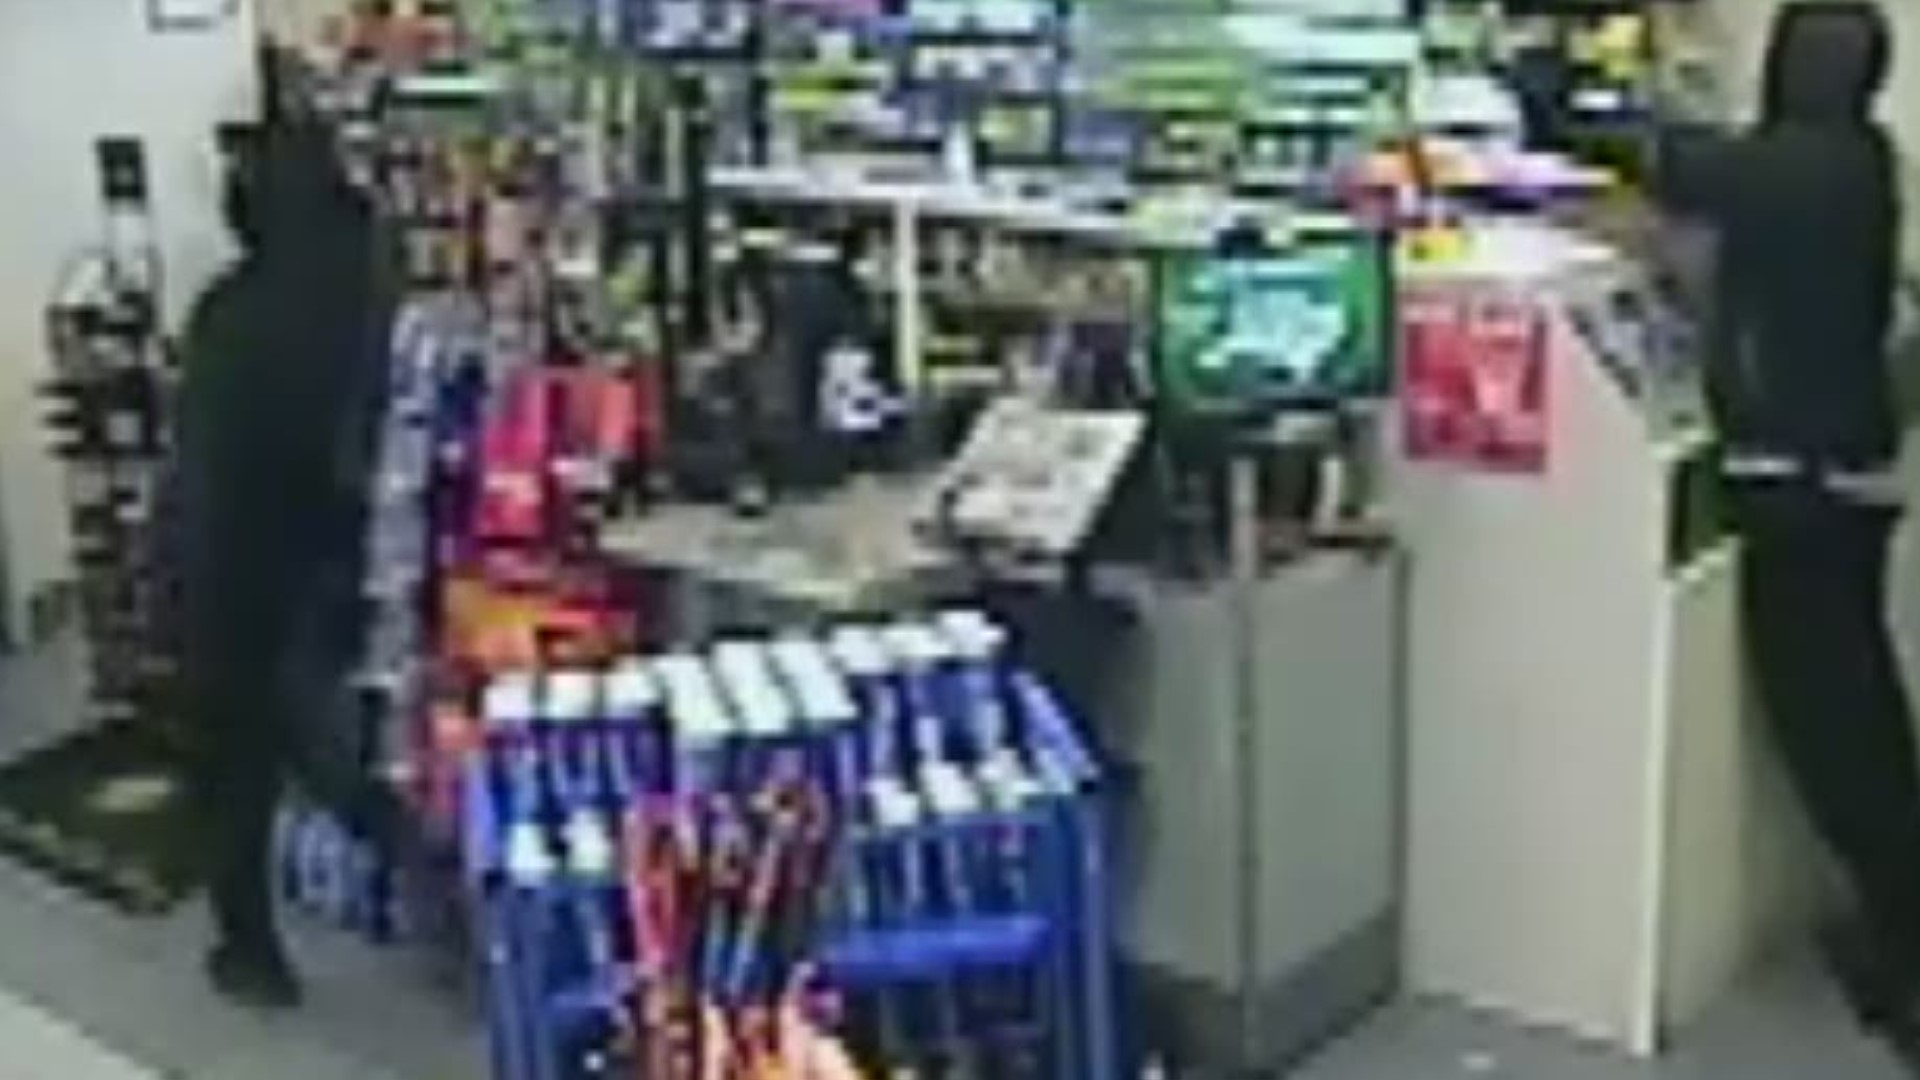 Greensboro Police are investigating a robbery at the BP Gas Station on Guilford College Road. Call Crime Stoppers with tips 336-373-1000.